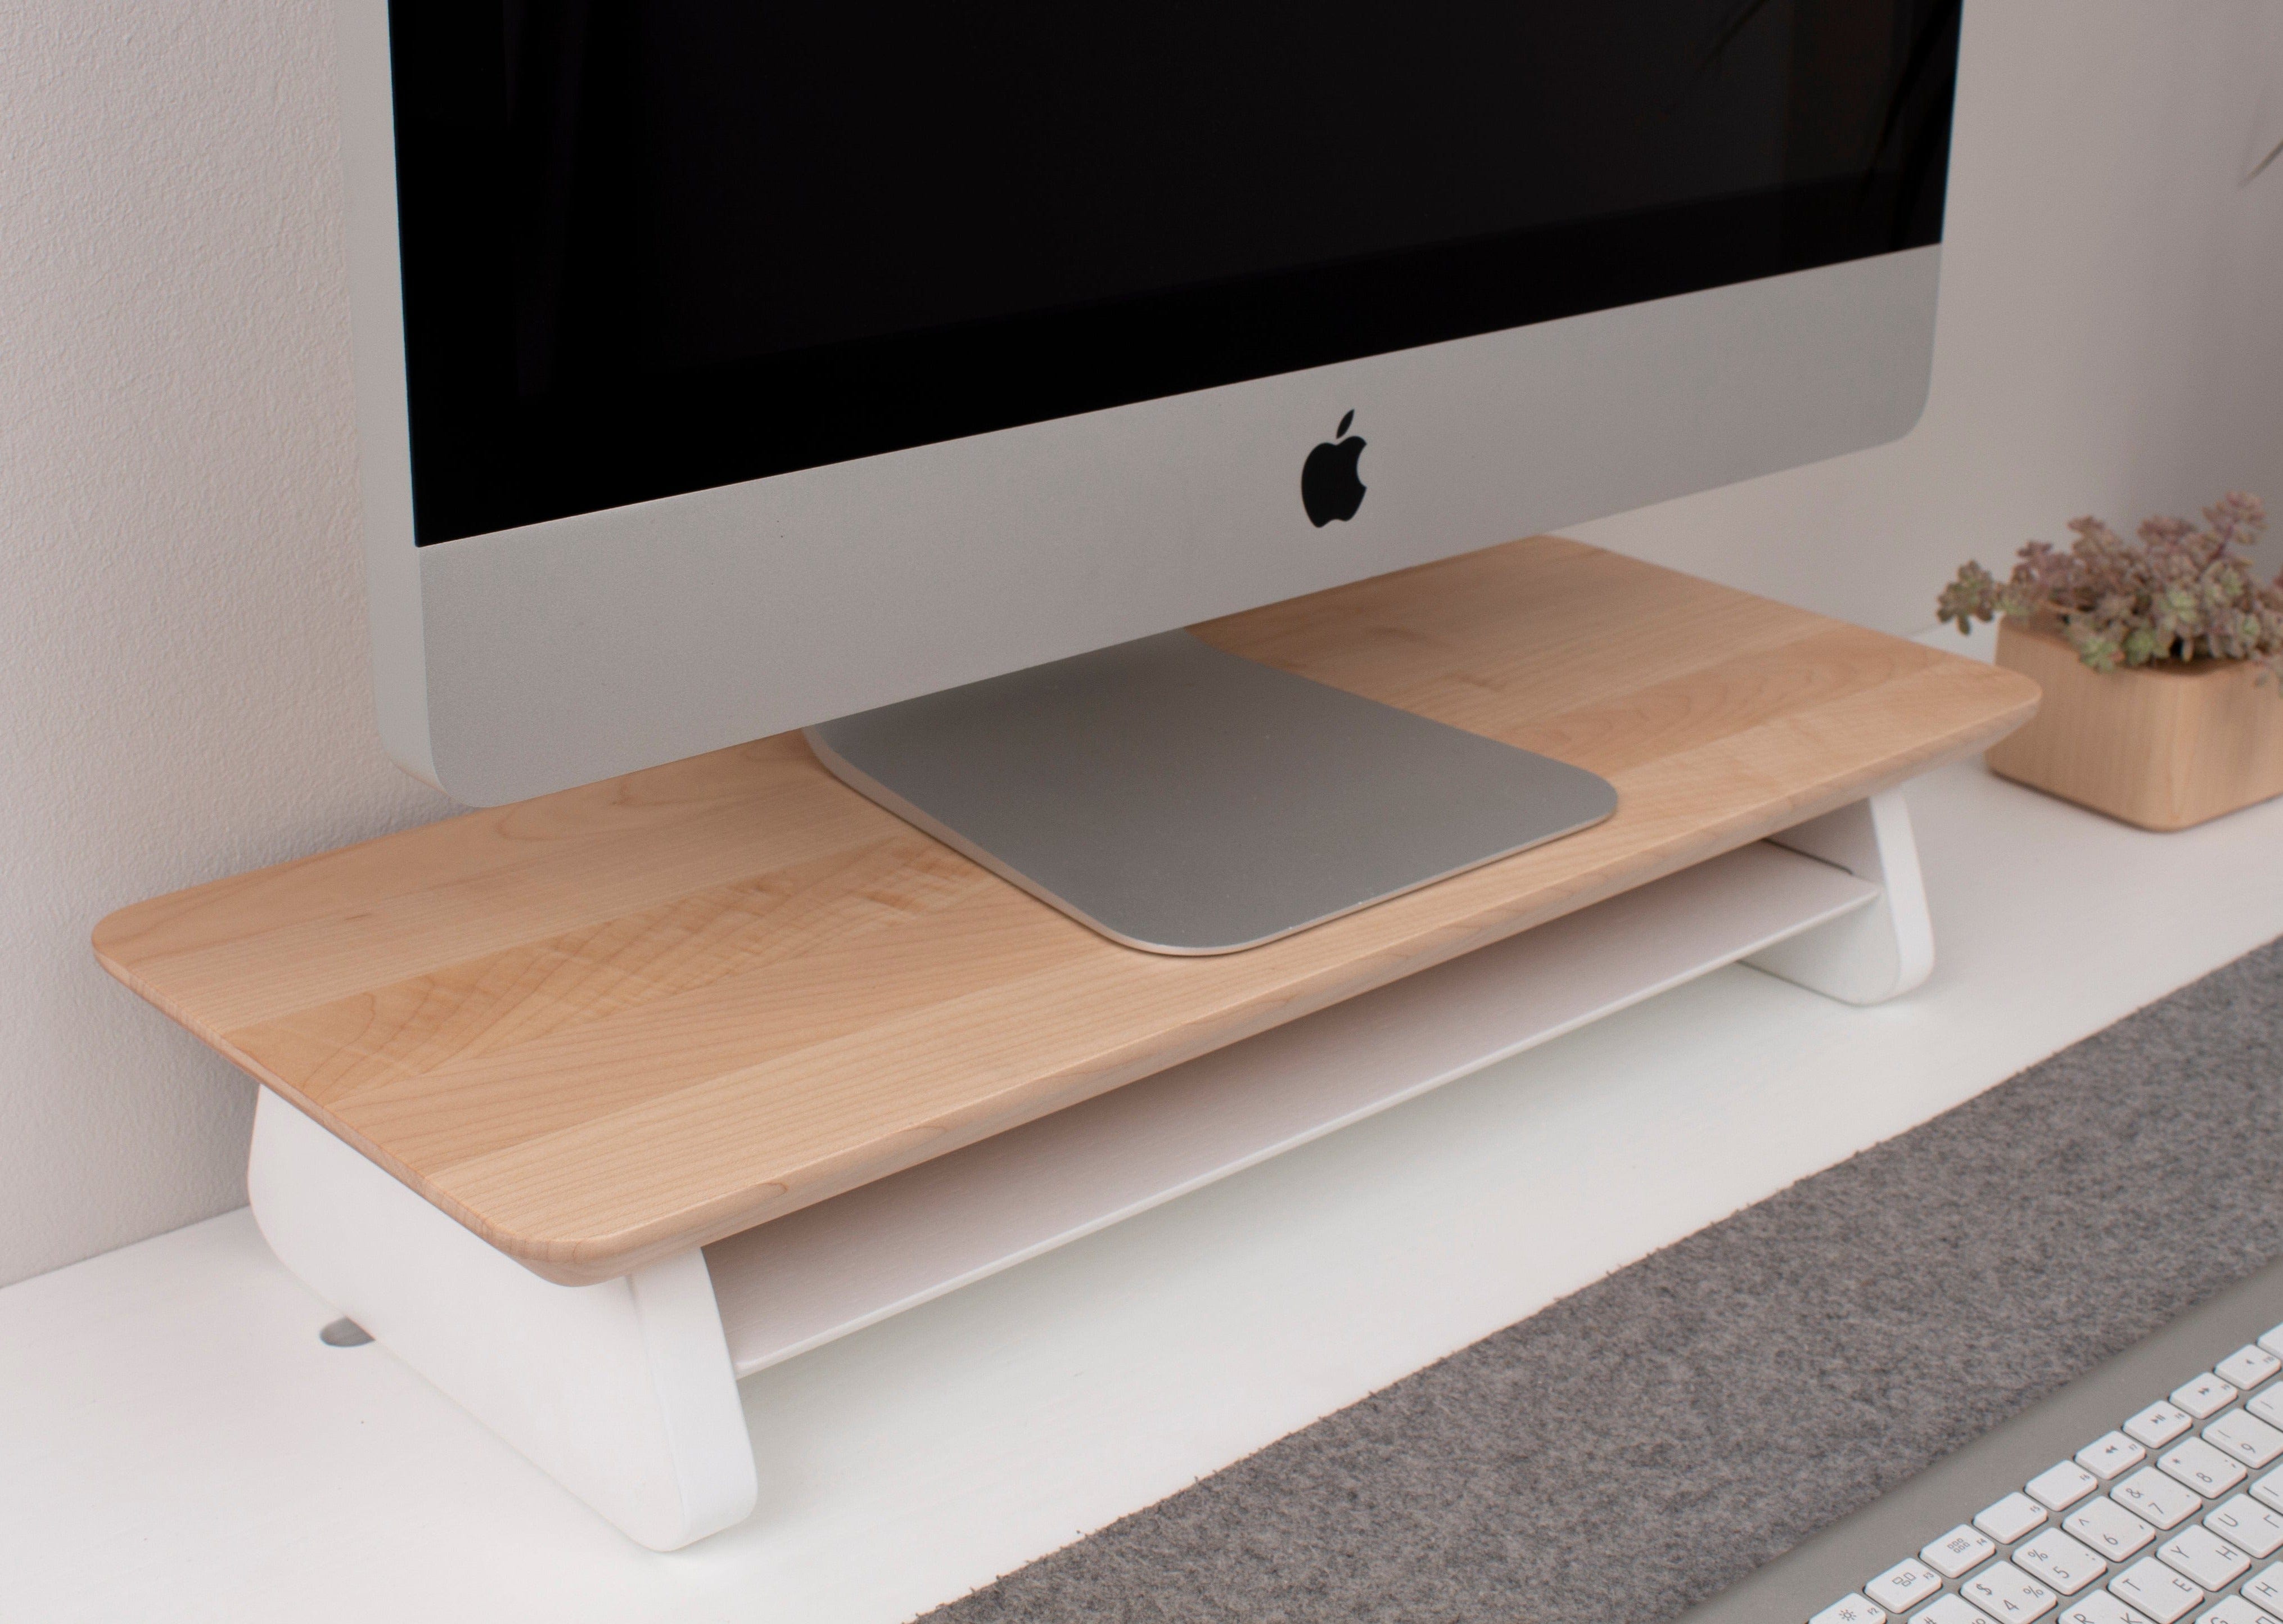 Small wooden monitor stand